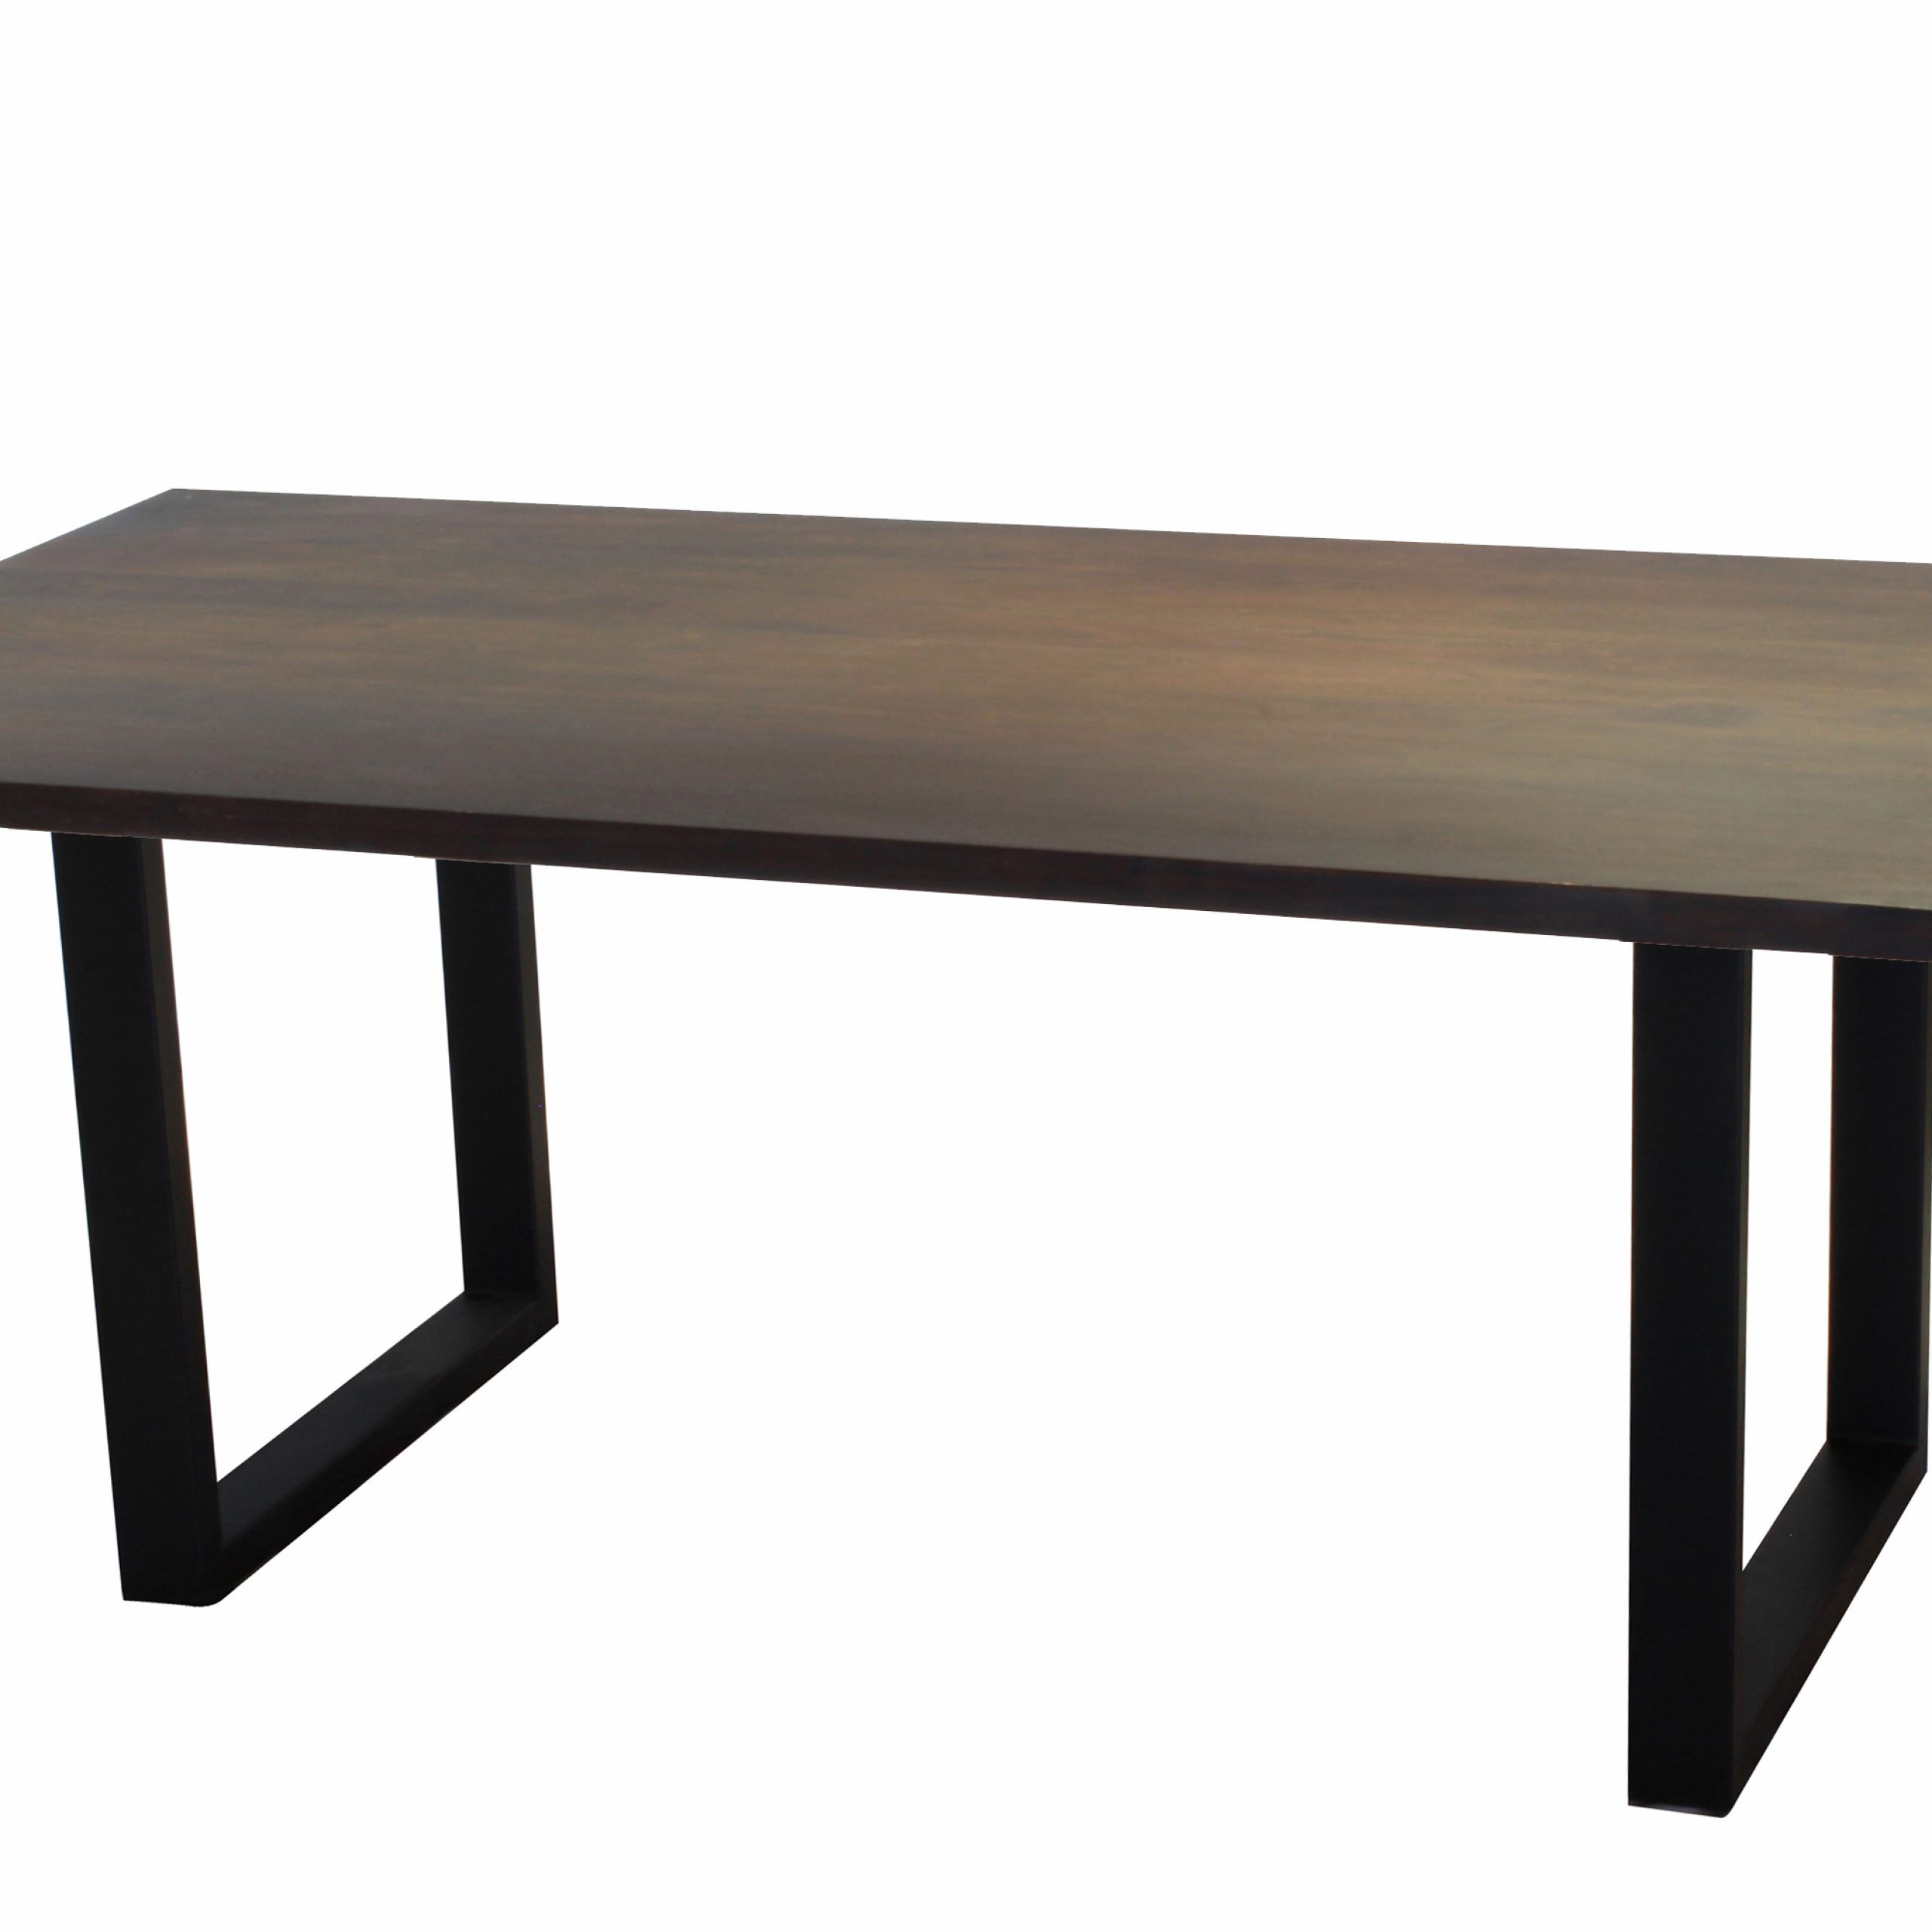 Acacia Dining Tables With Black Victor Legs With Regard To Fashionable Corcoran Acacia Live Edge Dining Table With Black Victor Legs – 96" (Photo 3 of 25)